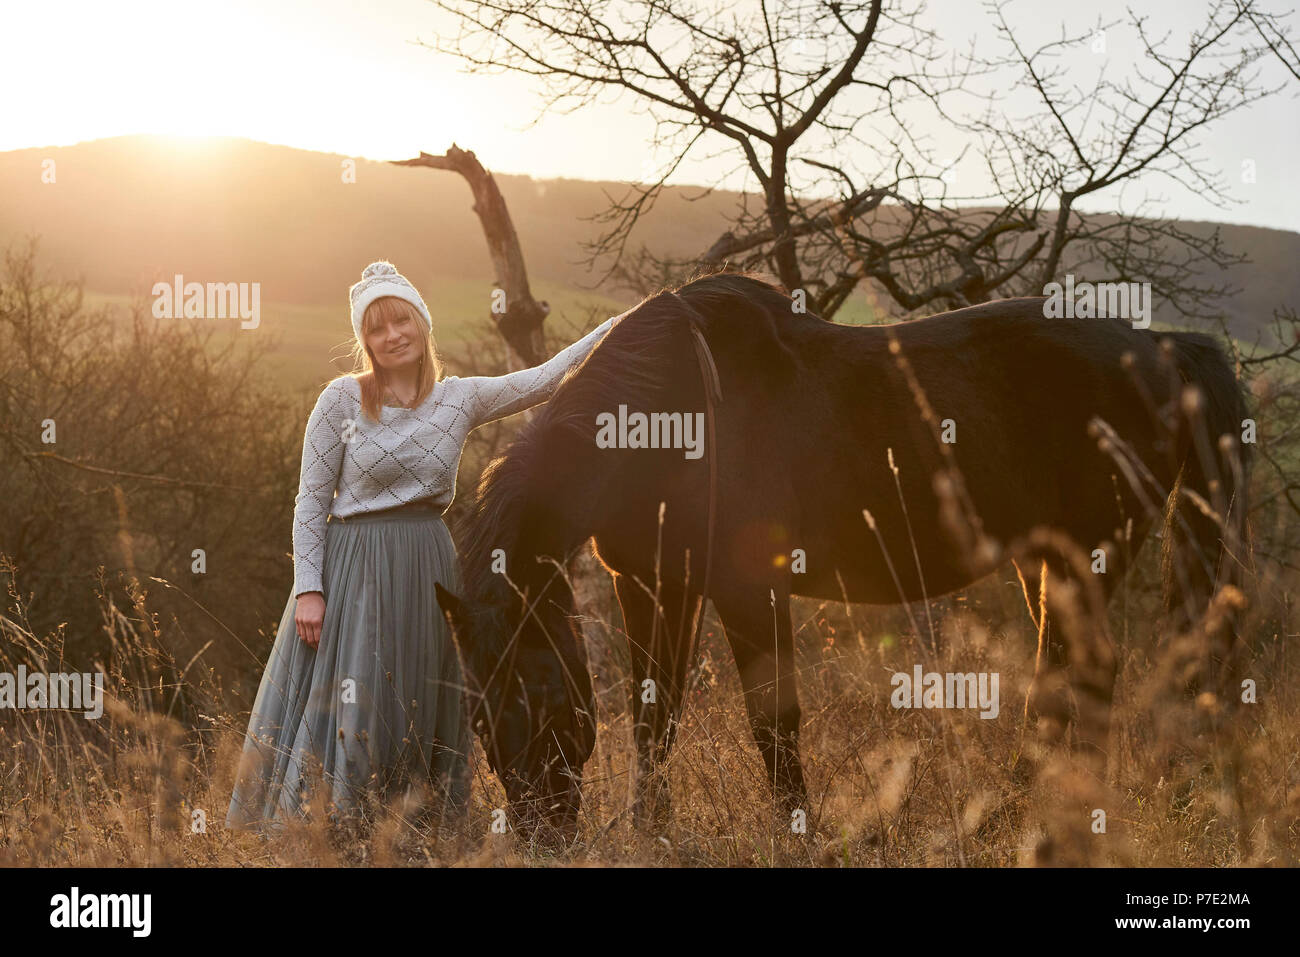 Portrait of woman with horse Stock Photo